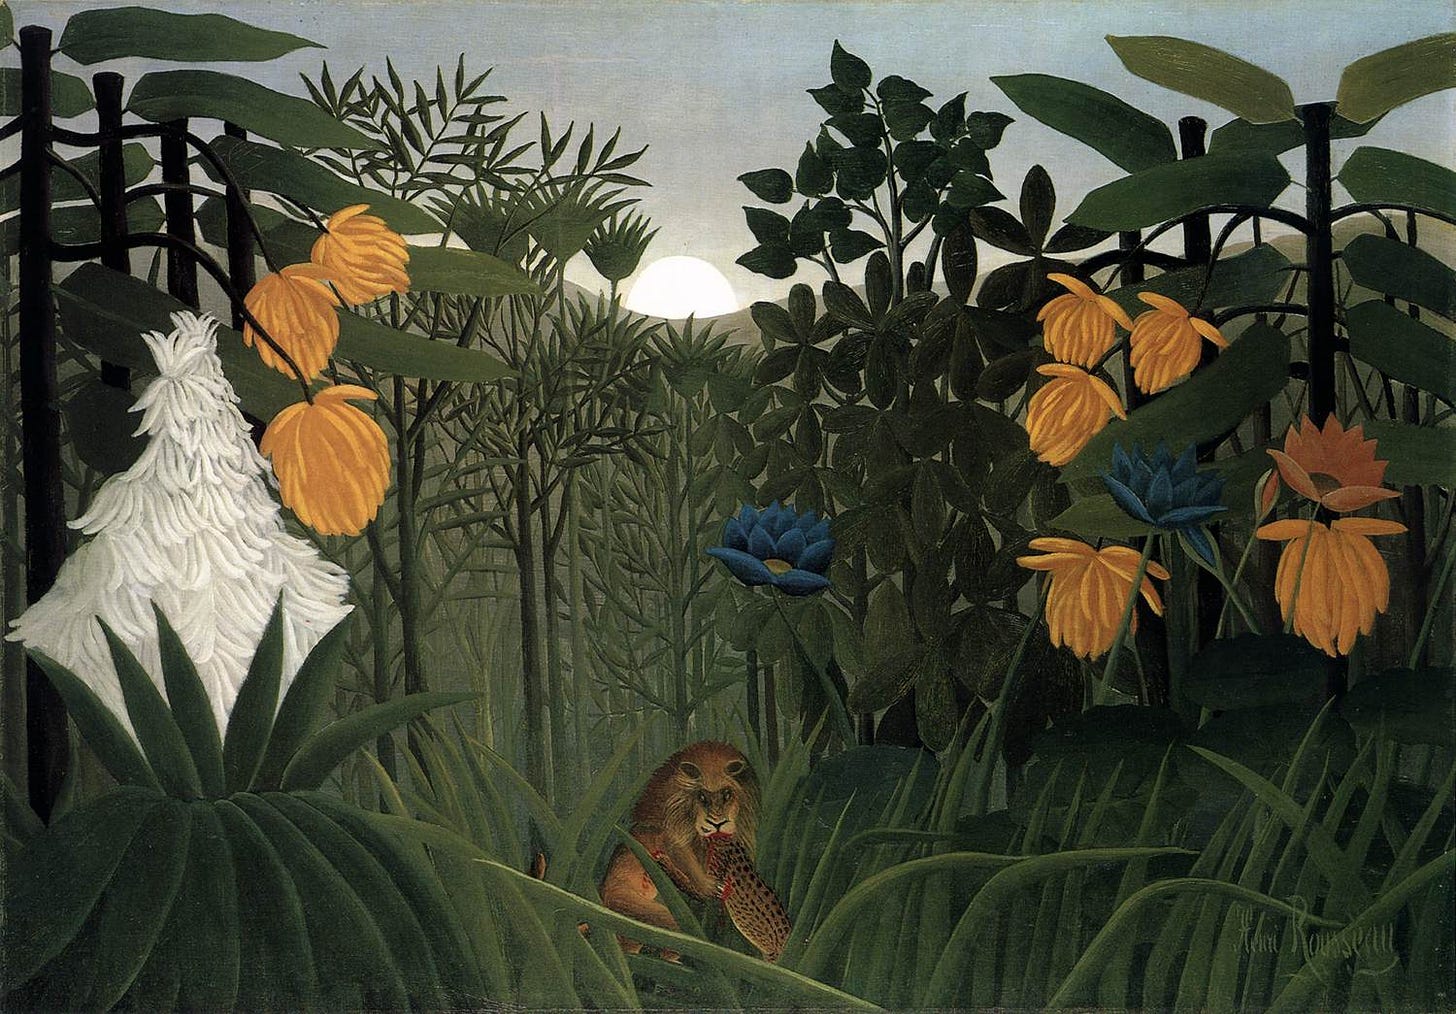 File:Henri Rousseau - The Repast of the Lion.jpg - Wikimedia Commons